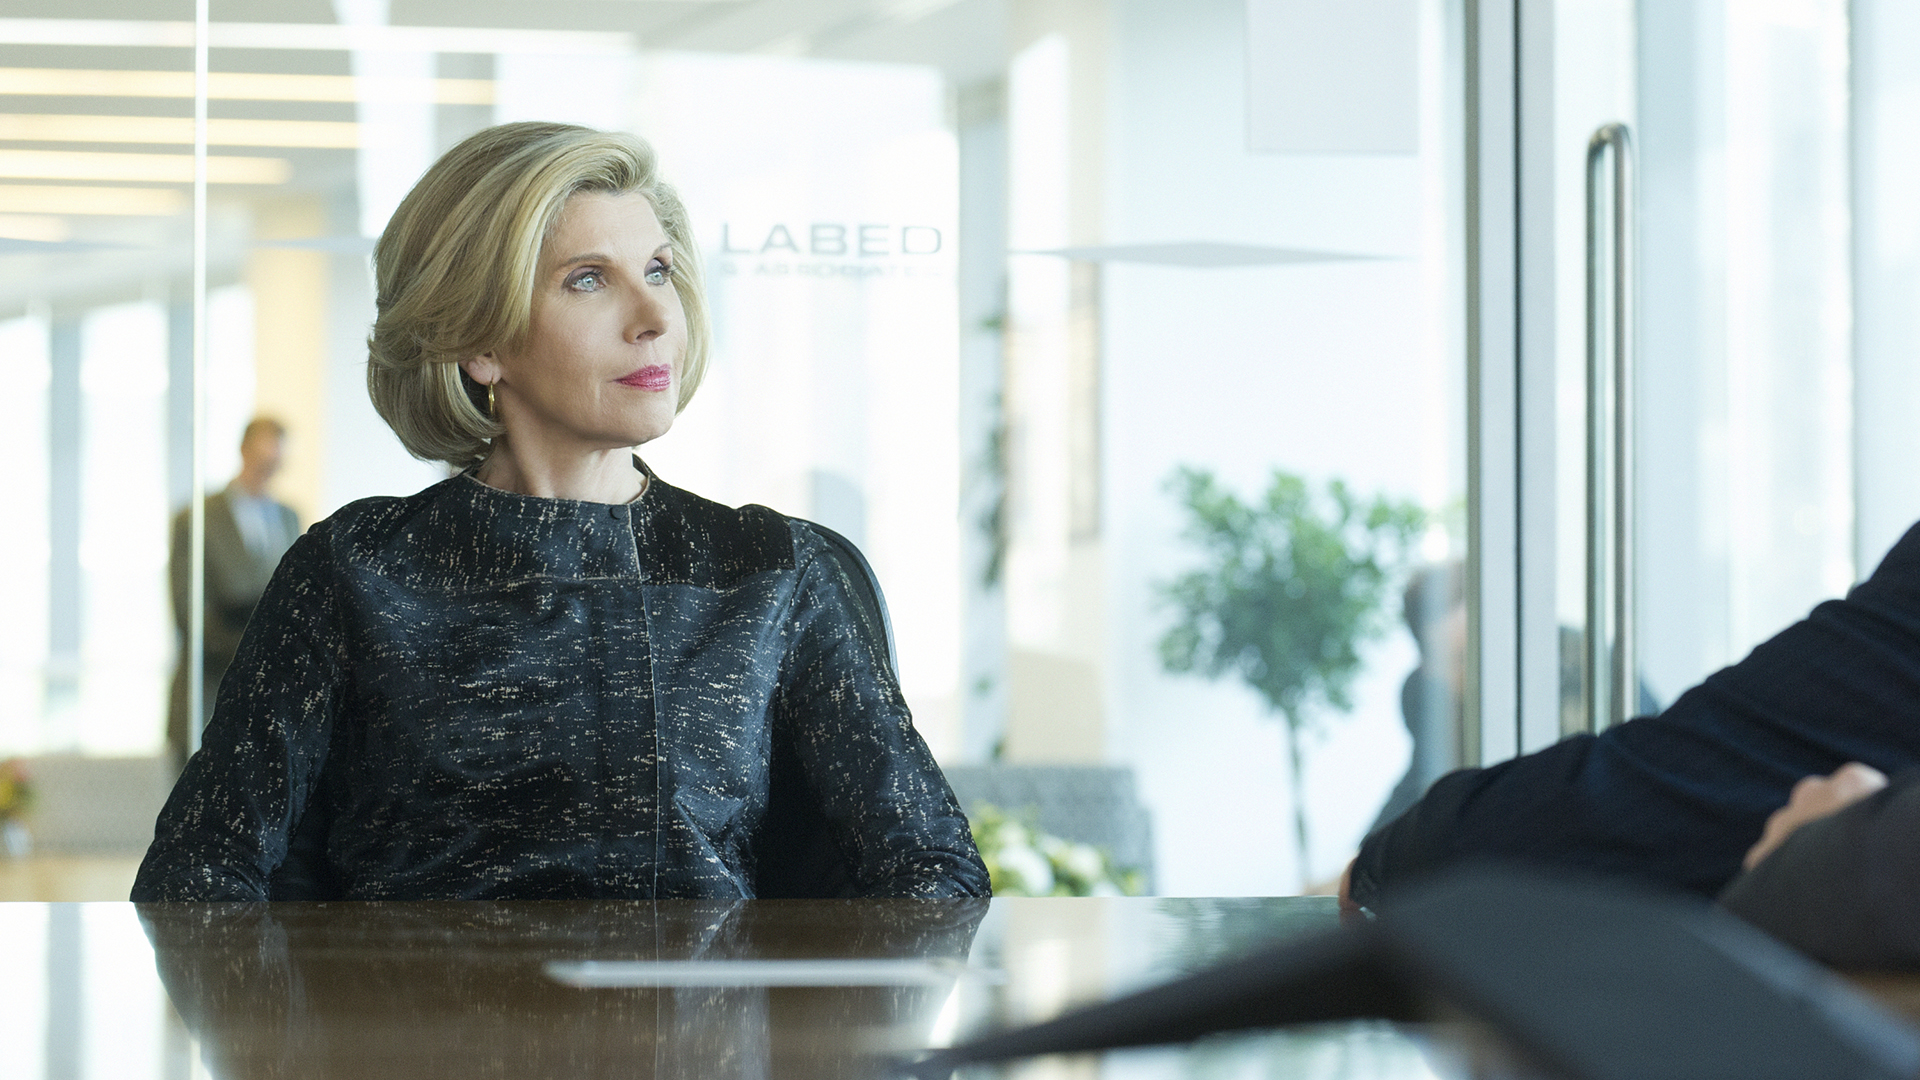 Now that we've gone behind the scenes, take a look at more photos from The Good Fight premiere.